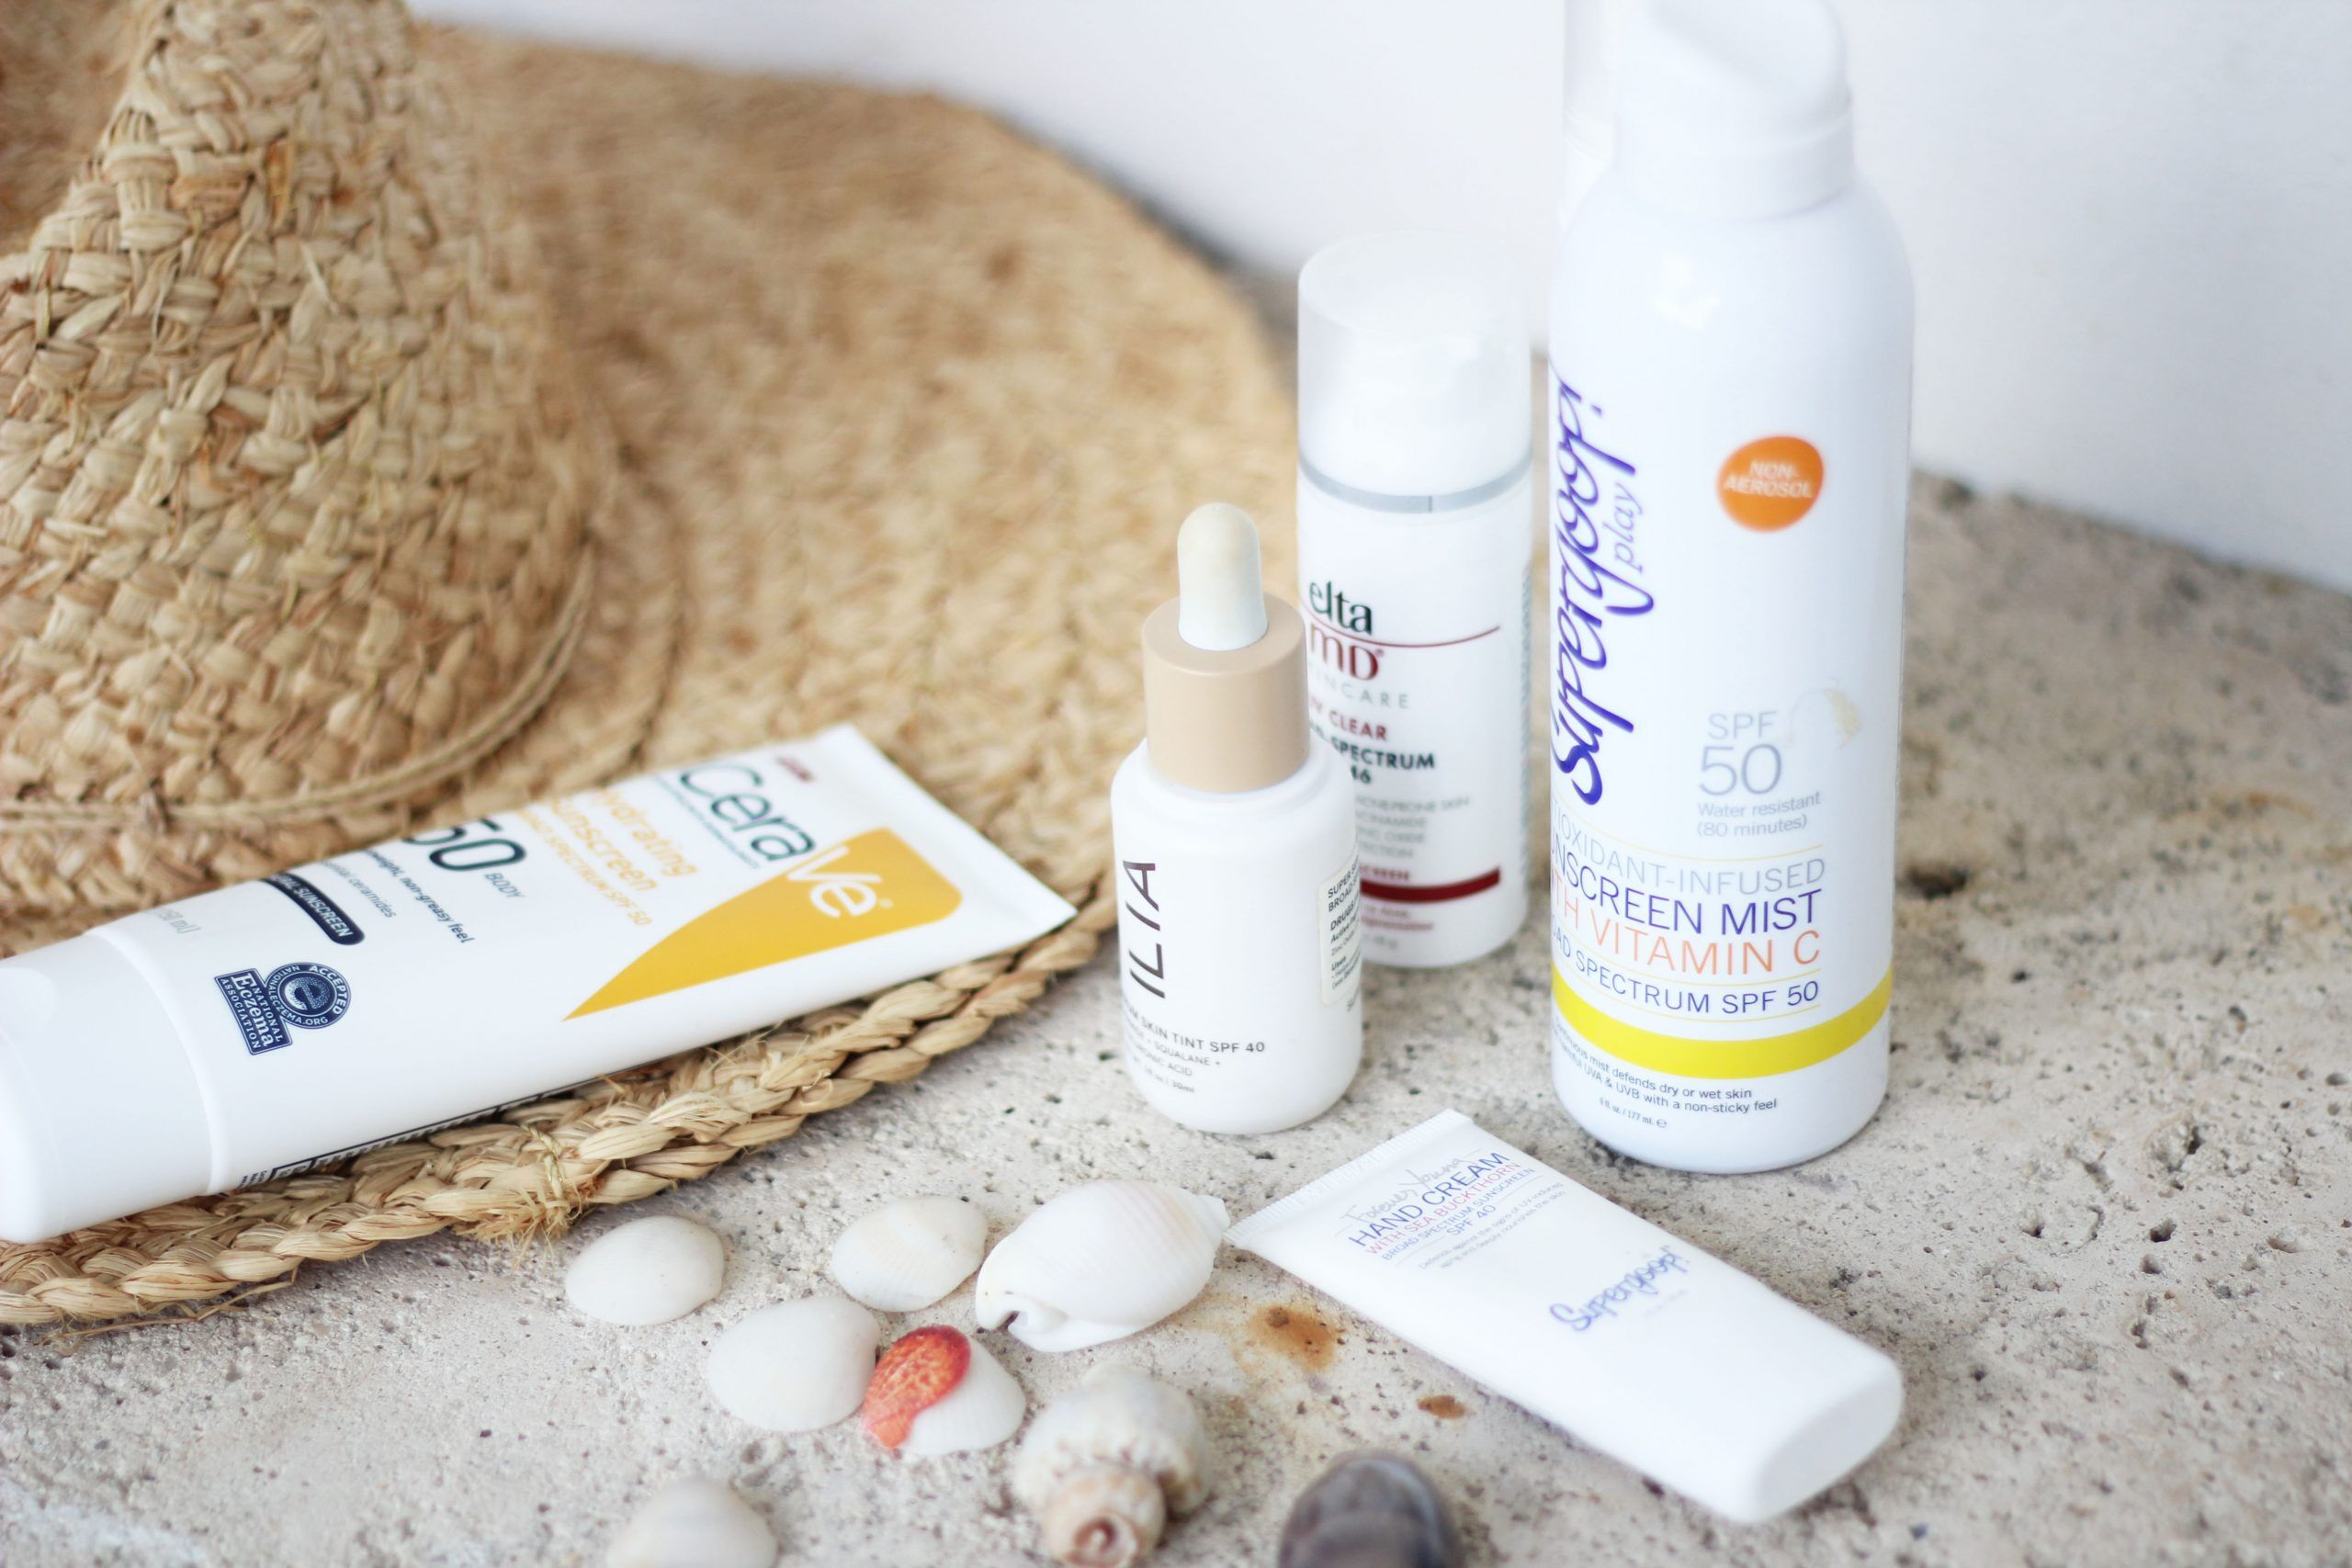 Are you looking for clean sunscreen that won't leave you sticky, greasy or white all over? Me too! Here is what I am using.